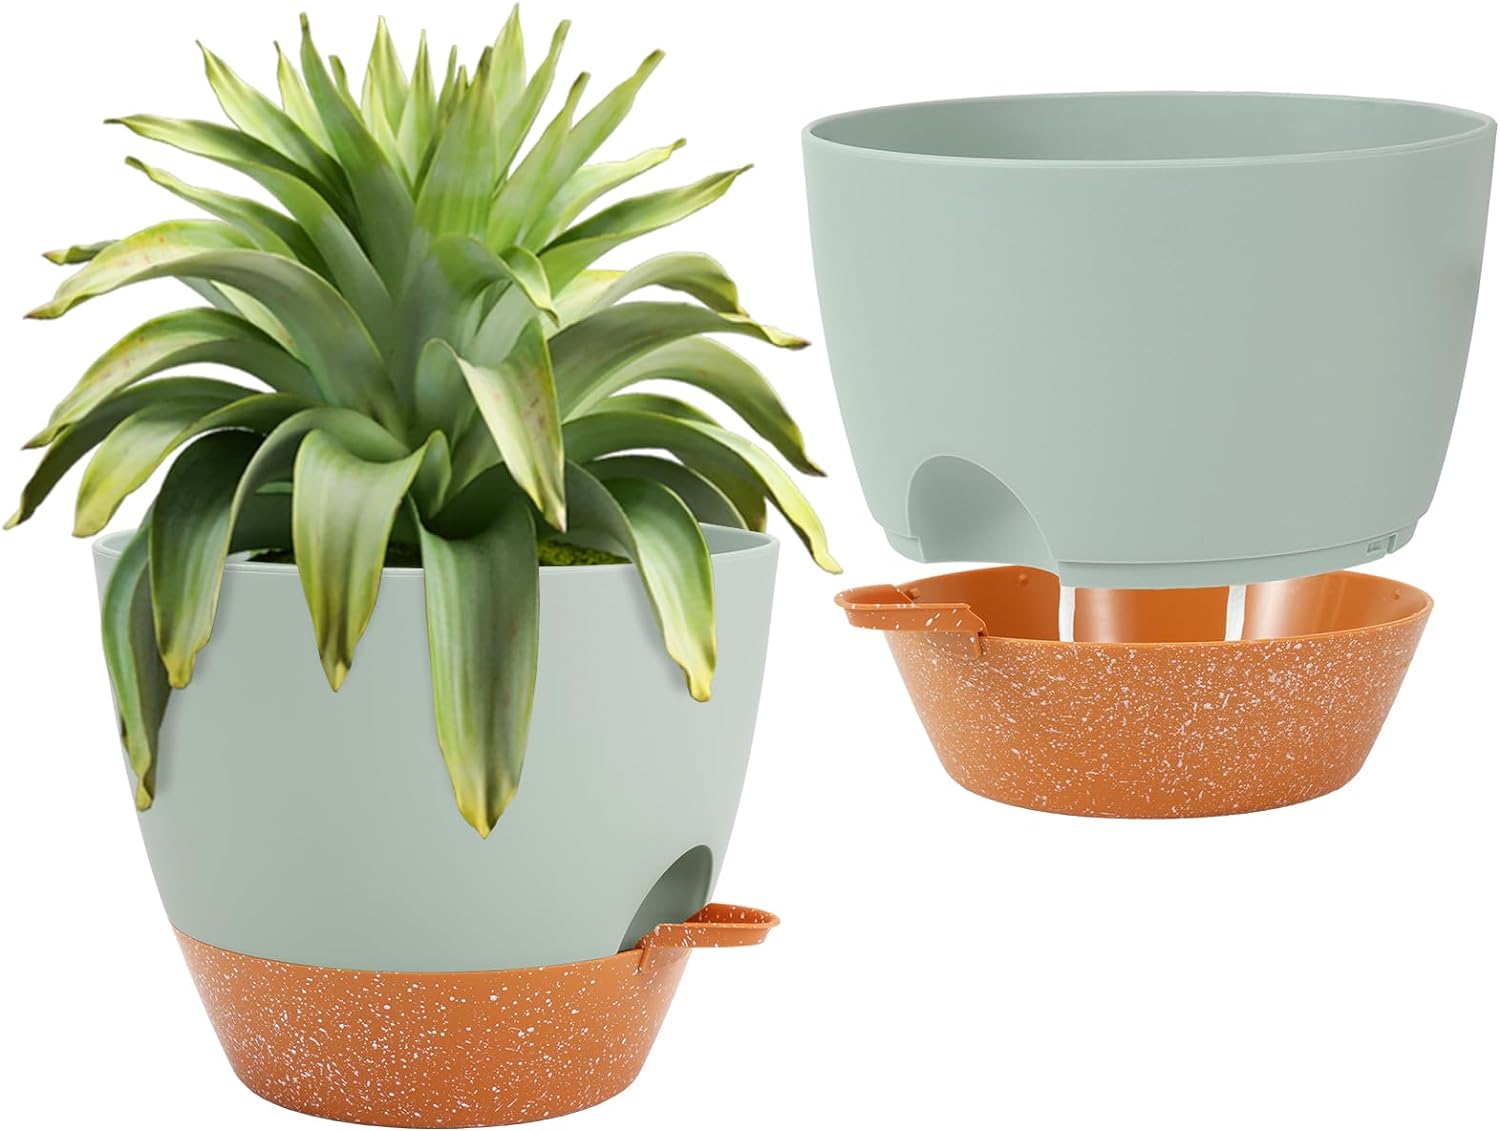 GARDIFE 10 inch Plant Pots,Self Watering Pots, 2 Pack Flower pots, Large Plastic Planters with Deep Reservior and High Drainage Holes for Indoor Outdoor Plants and Flowers, Green